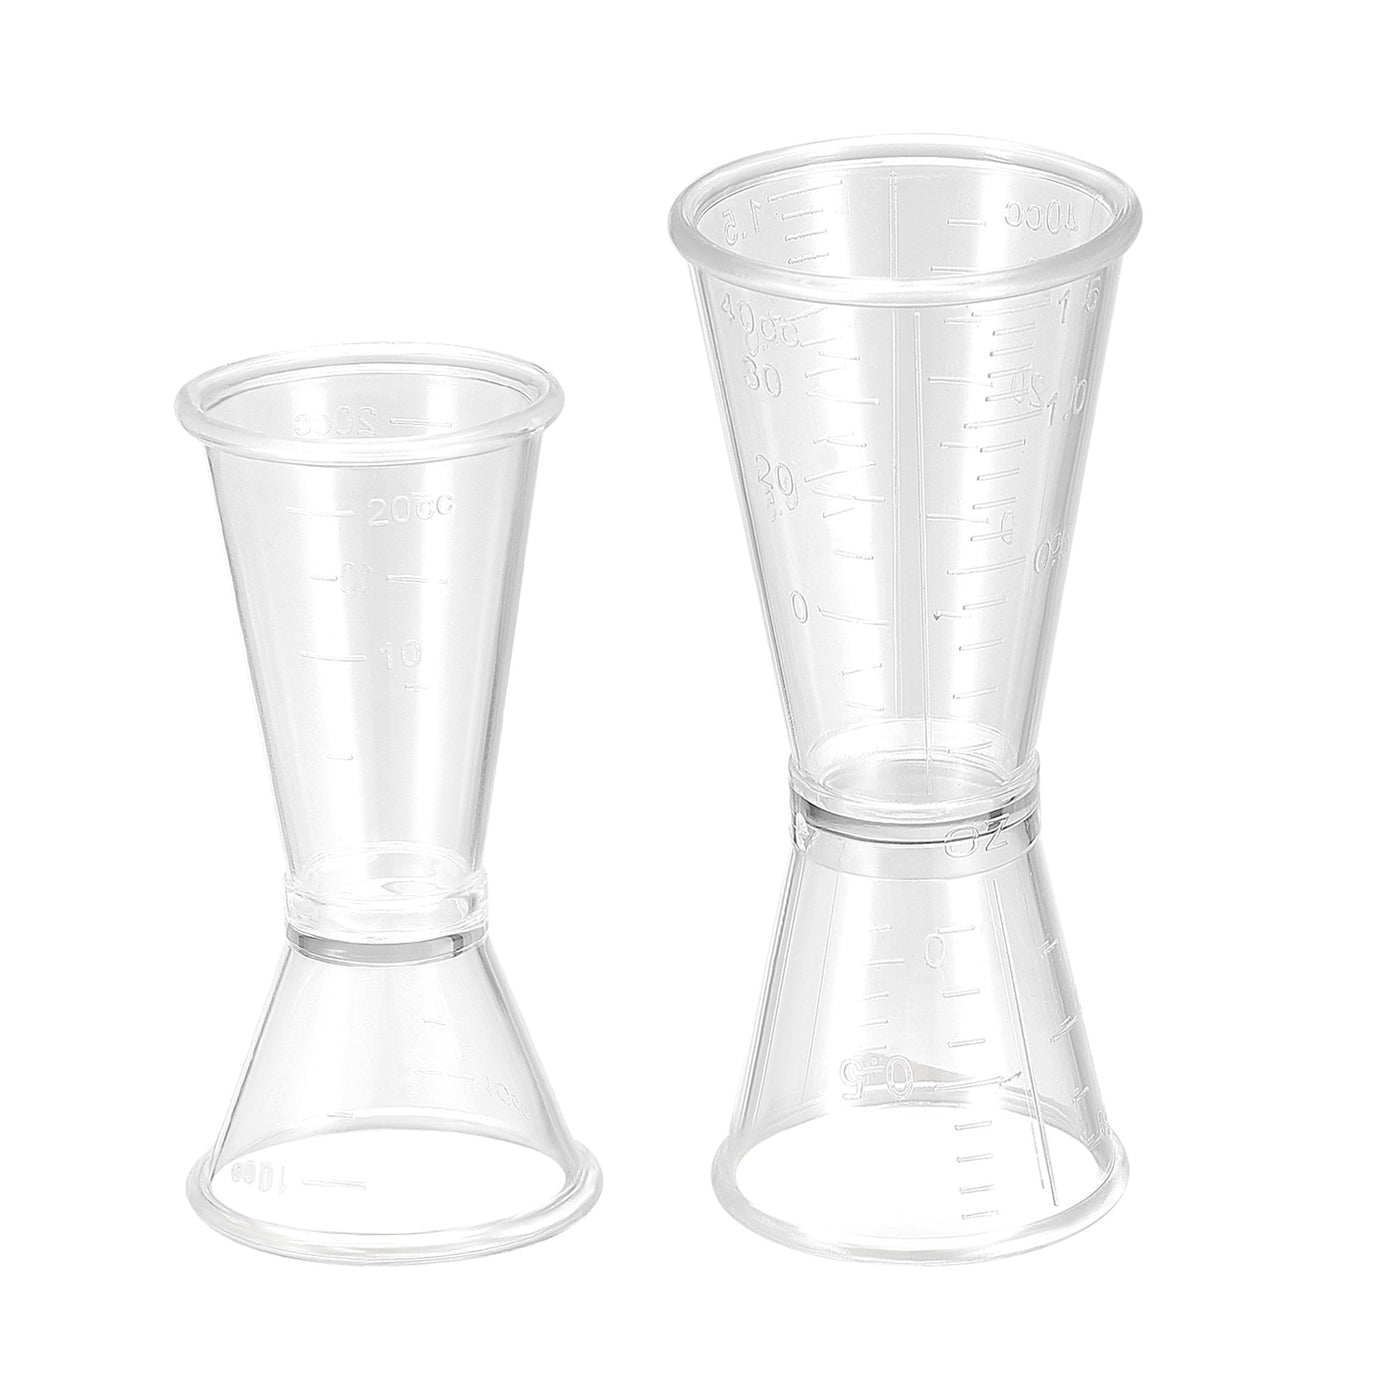 uxcell Uxcell Measuring Cup 20ml/10ml, 40ml/20ml, PC Plastic Double Head Beaker for Lab Kitchen Liquids 4in2 Sets